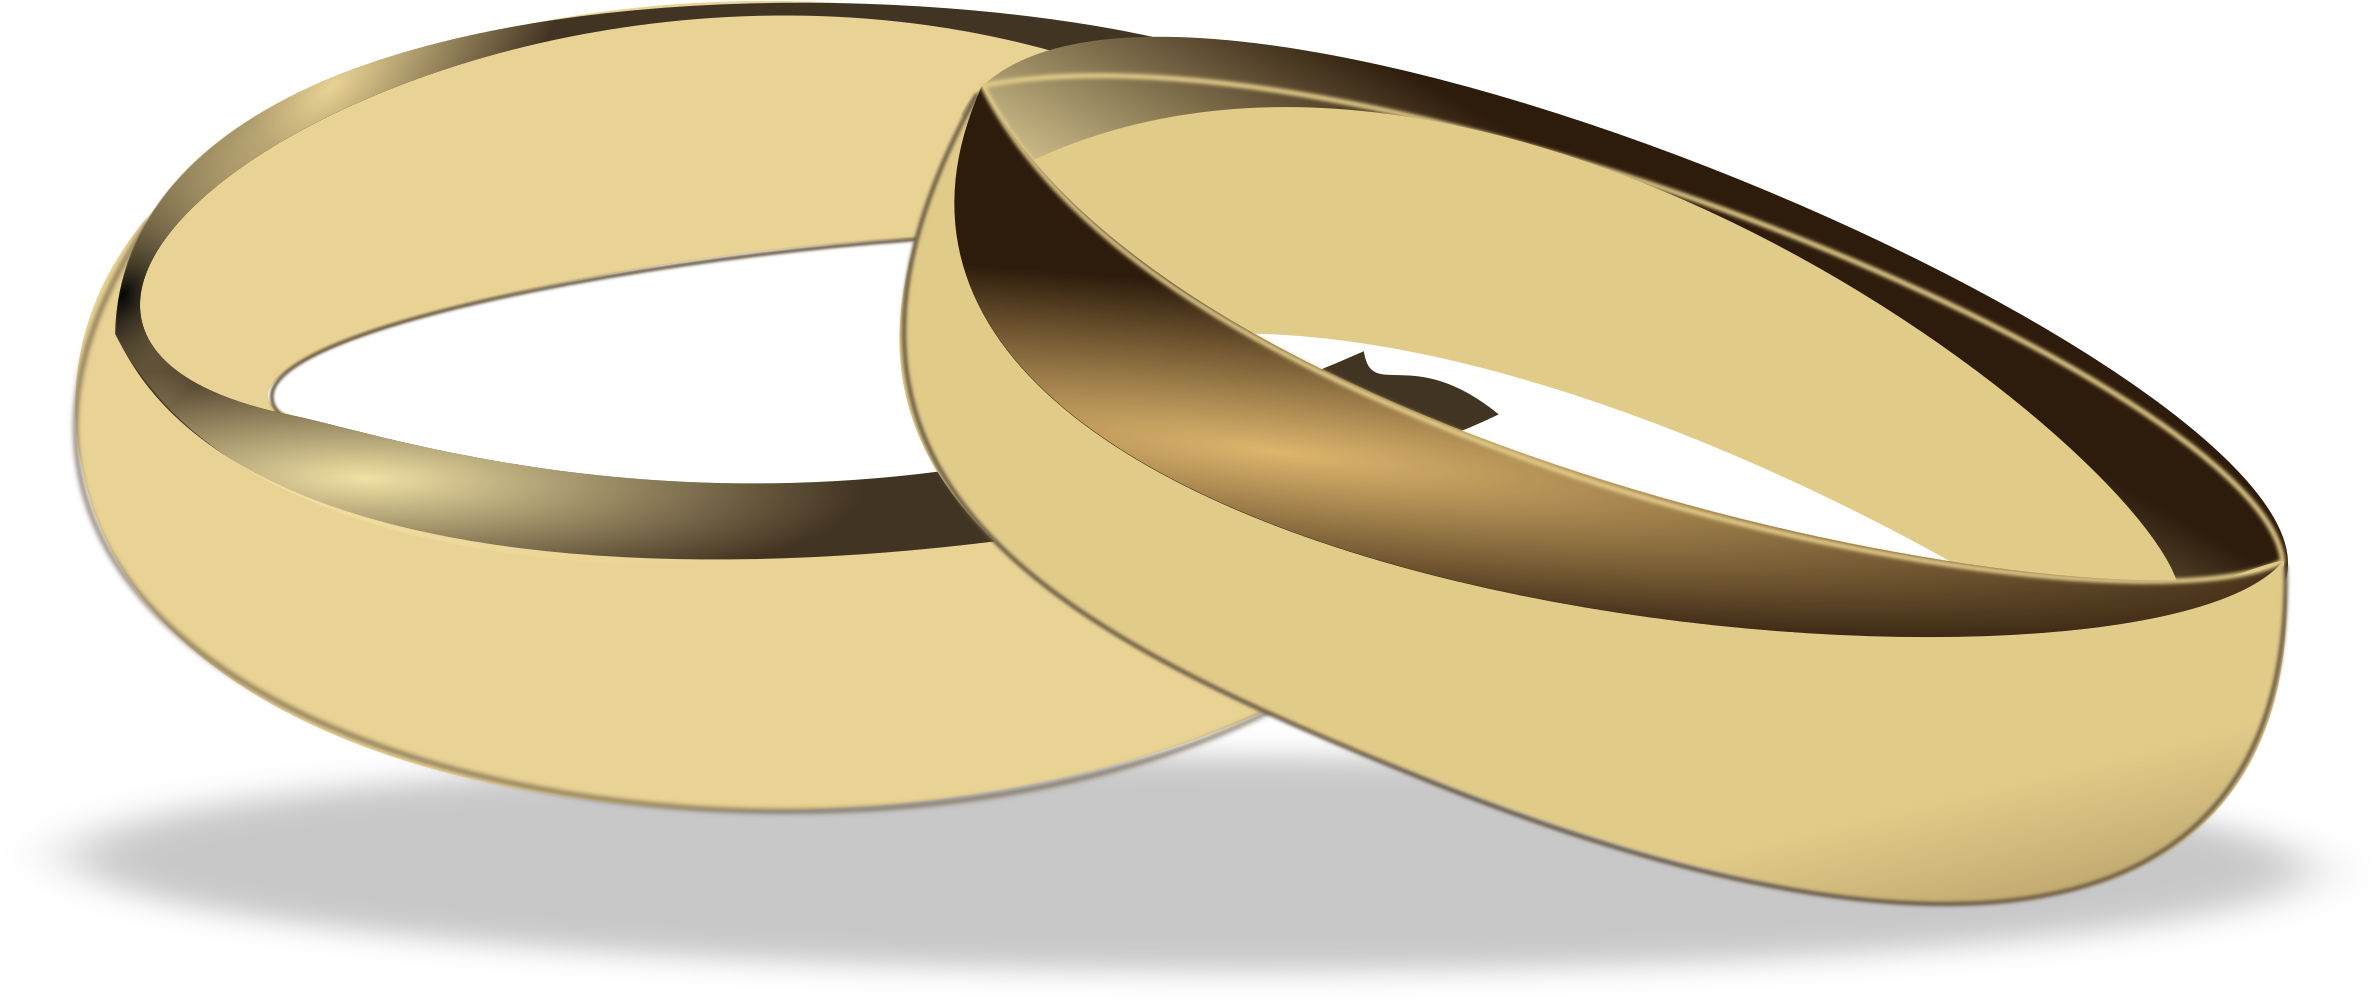 A Close Up Of Rings